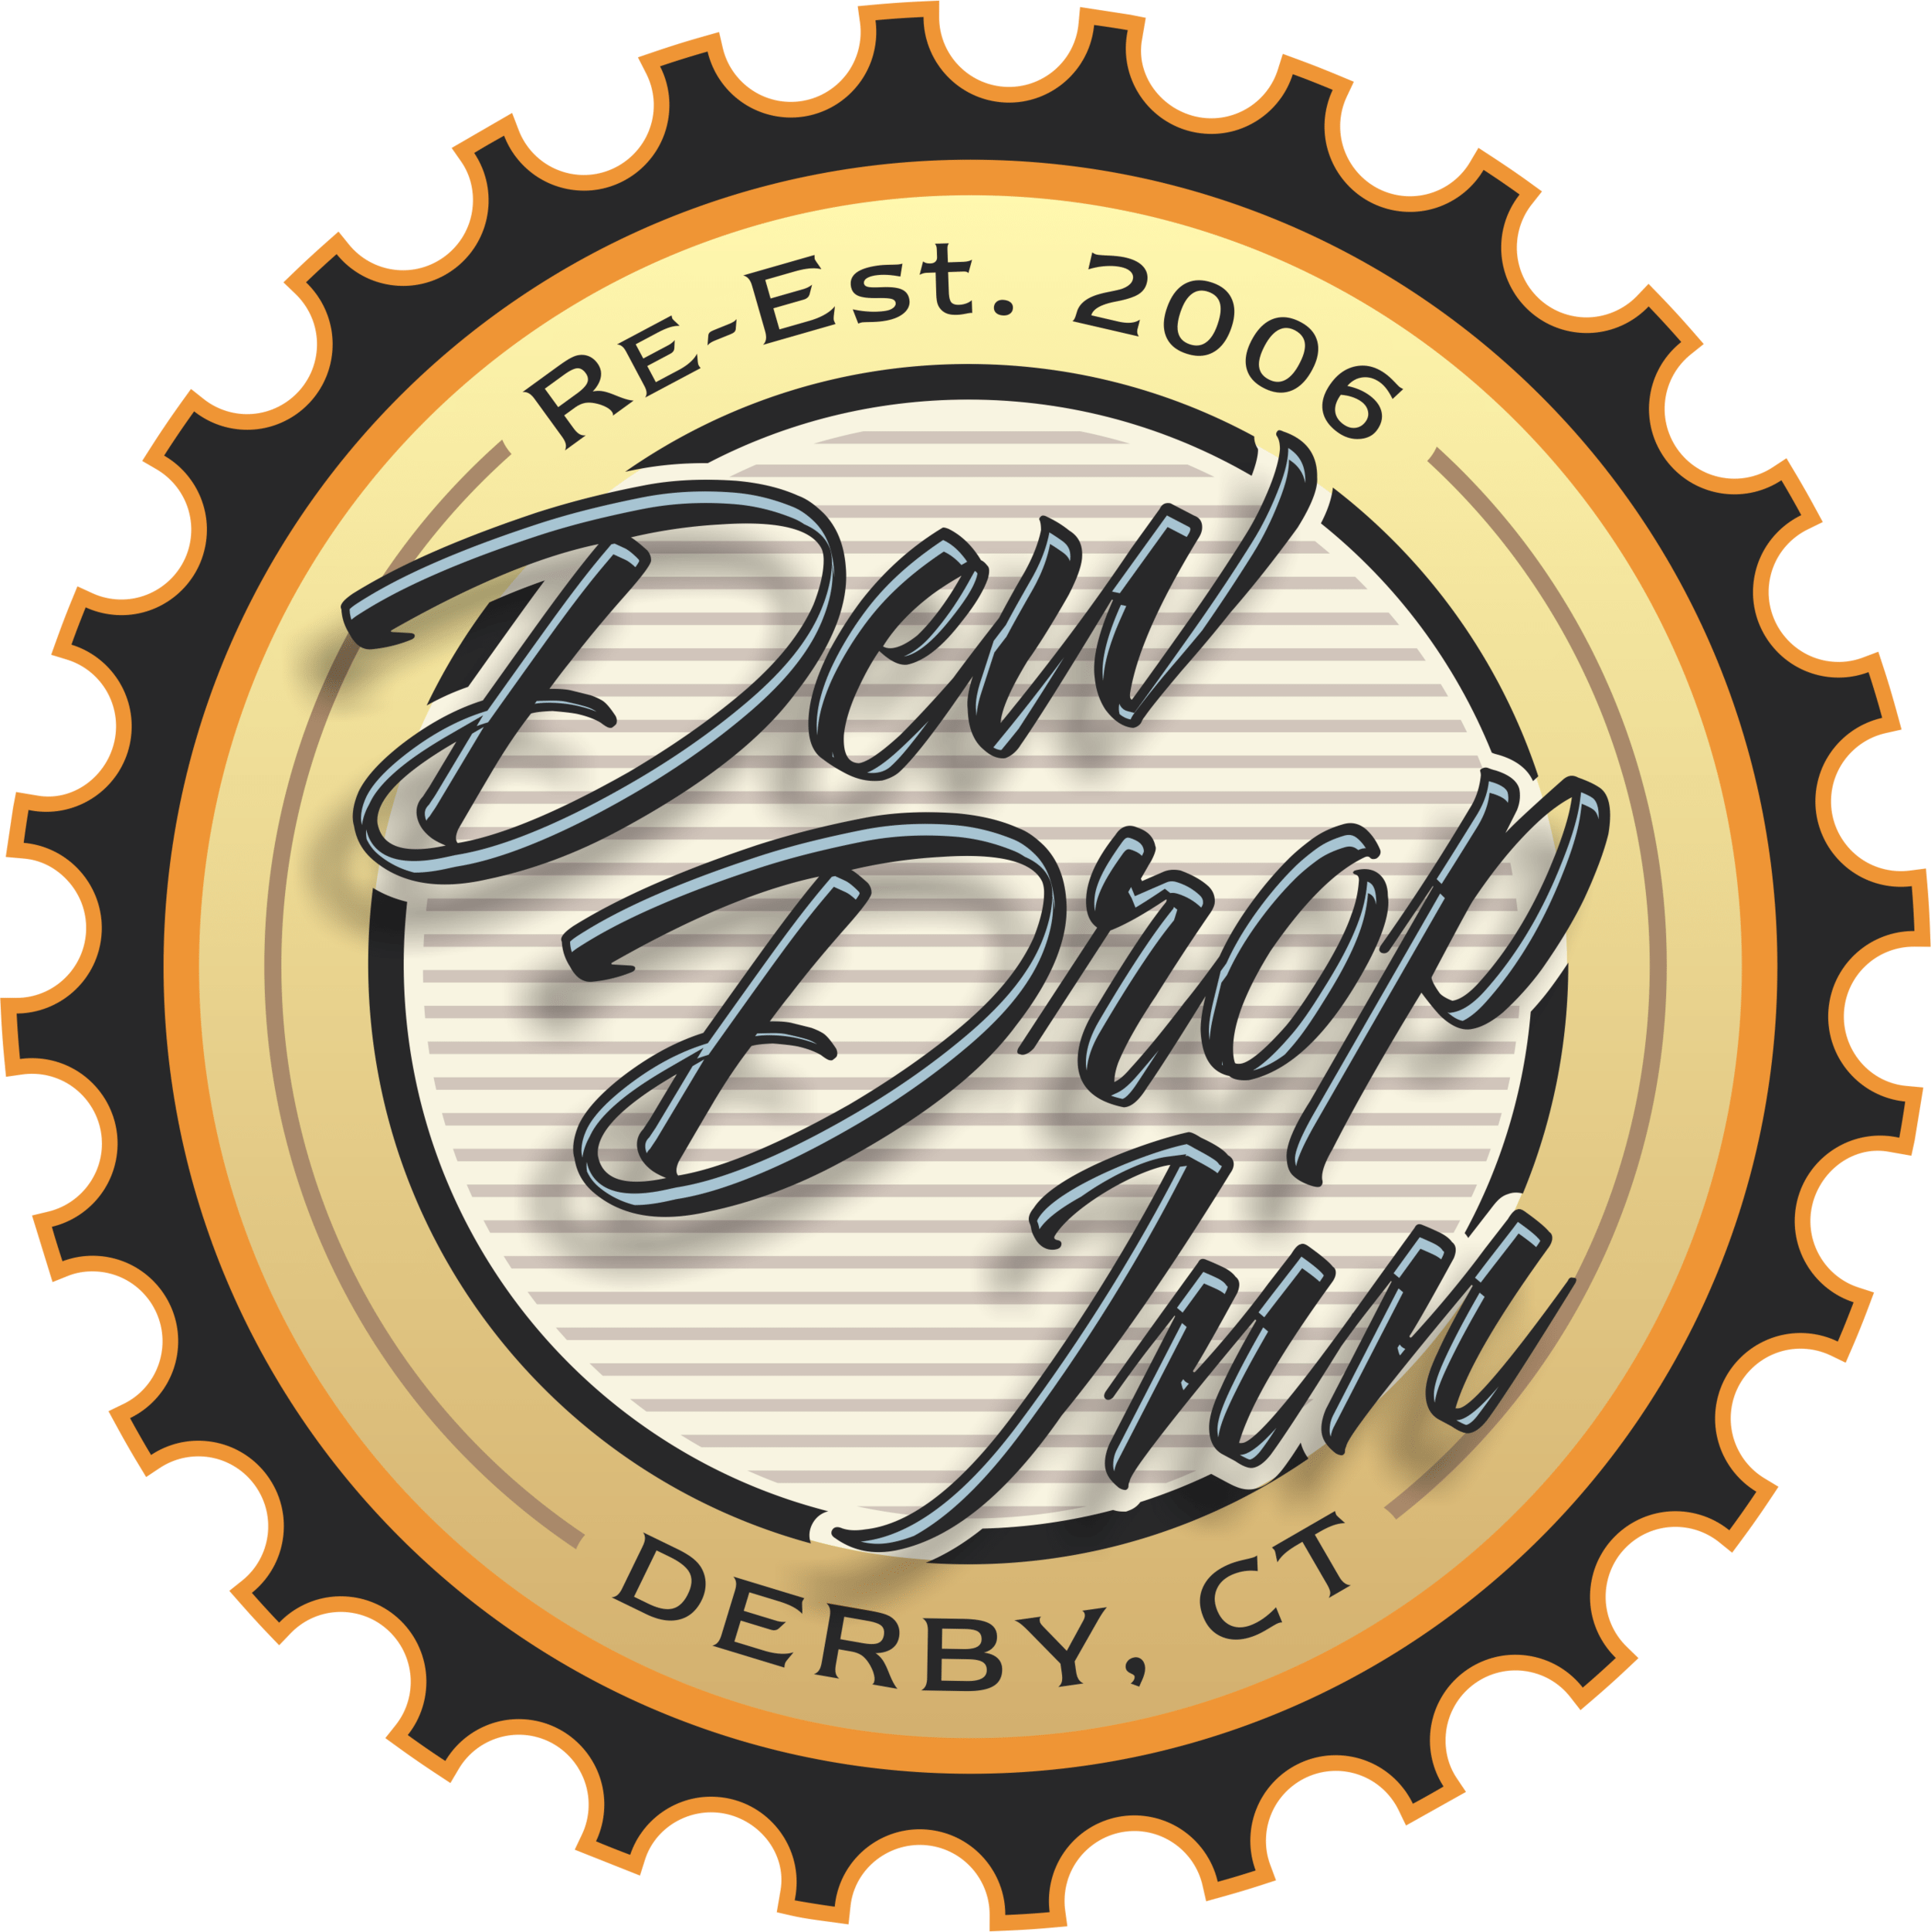 About Archives - Dew Drop Inn